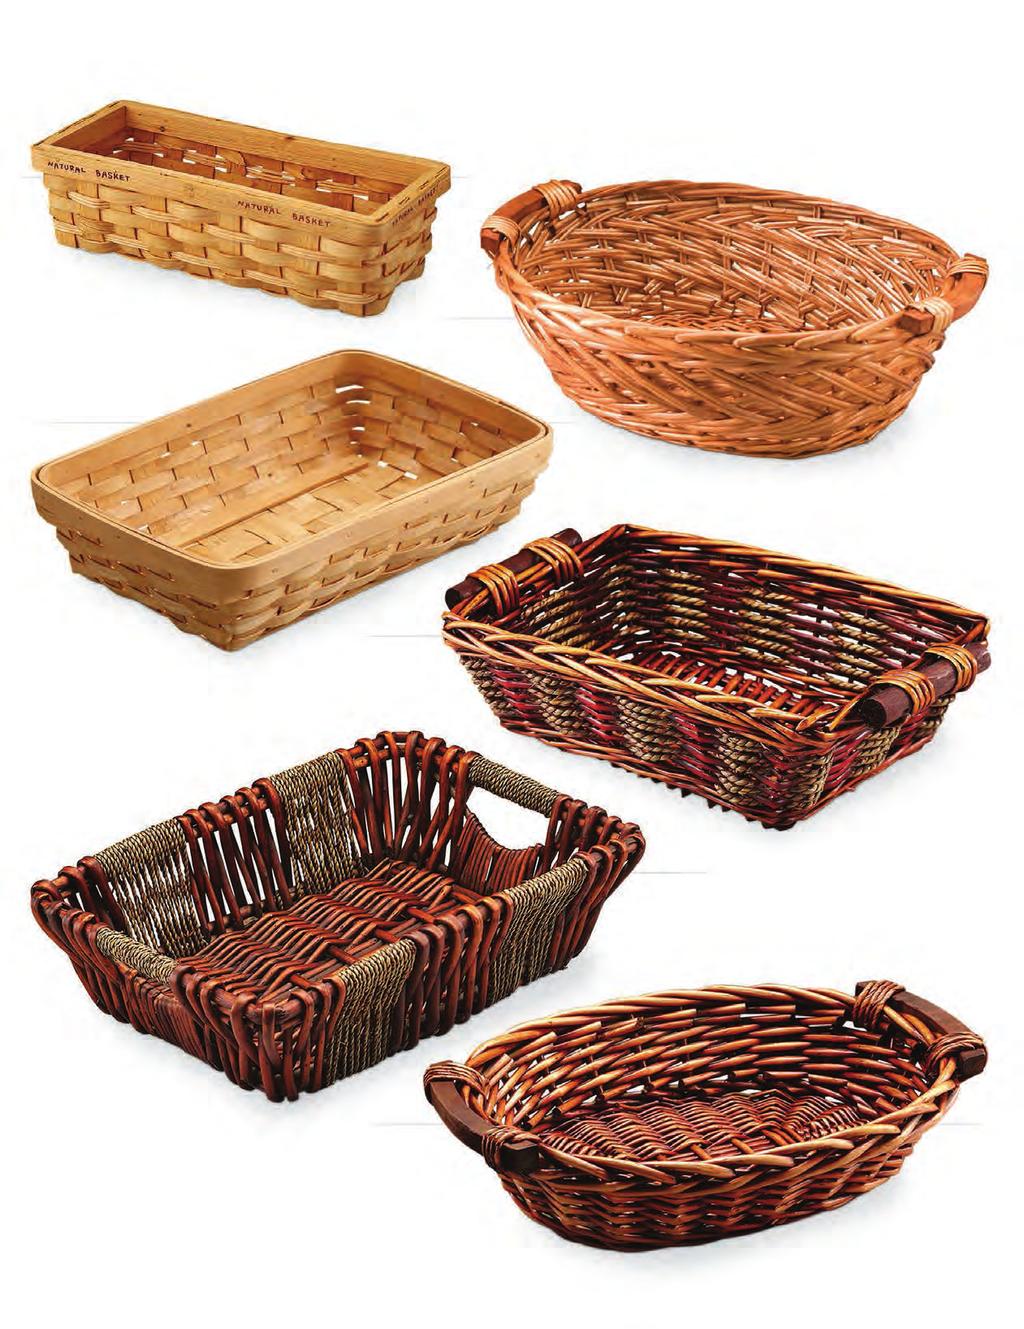 Baskets Without Plastic Liners 51115 Oval Split Willow Tray with Wooden Ear Handles Brown stain 15 x 12 x 4.5 4/$5.49 ea. SALE! 14273 Rectangular Woodchip Basket Rim stenciled with Natural Basket 9.